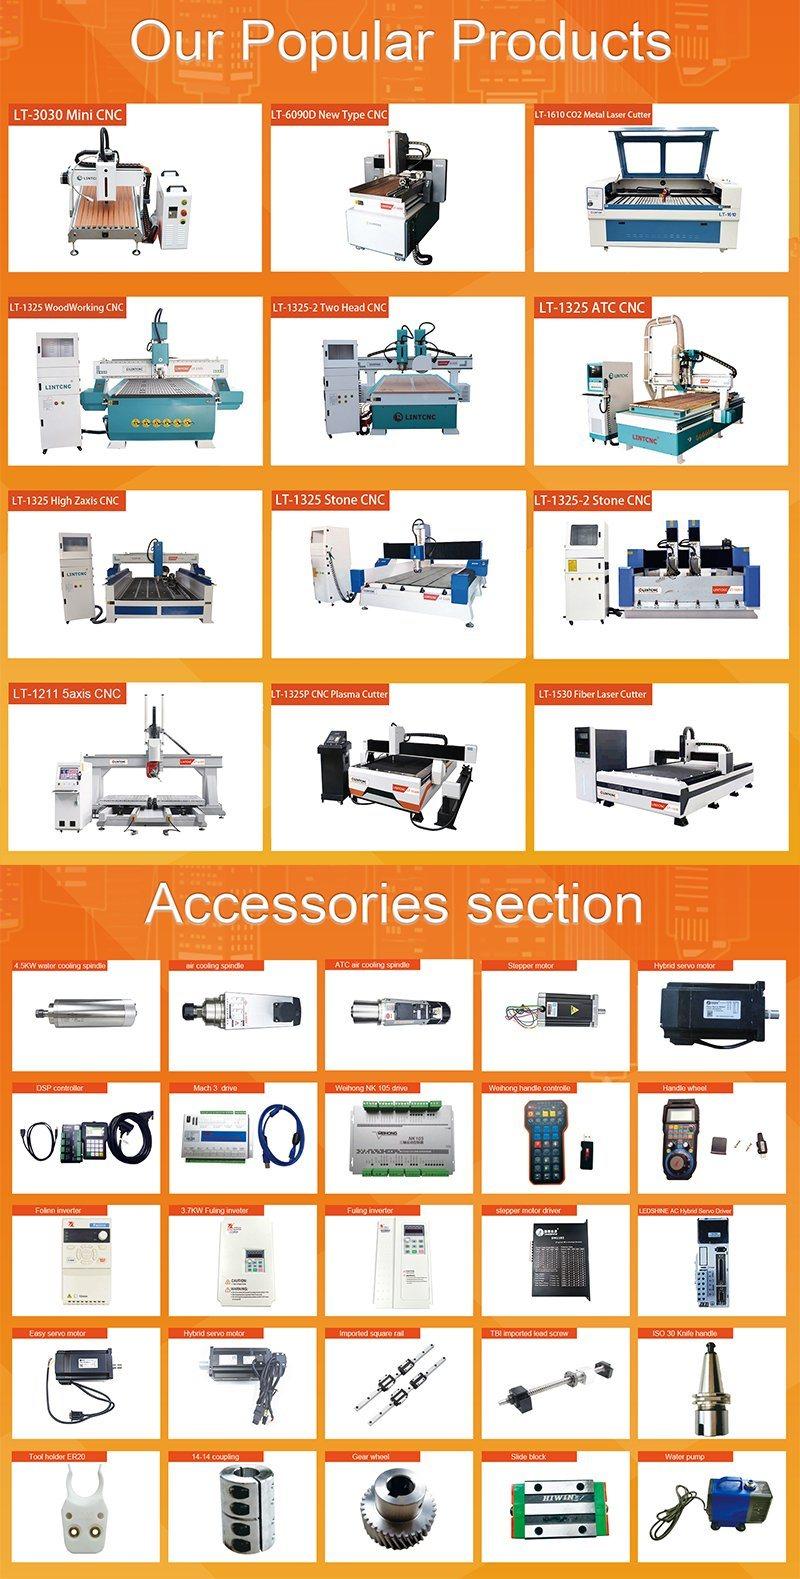 Acrylic PVC Cutting Vacuum Worktable CCD Camera Wood 6090 6012 1212 1325 CNC Router Machine for Sale